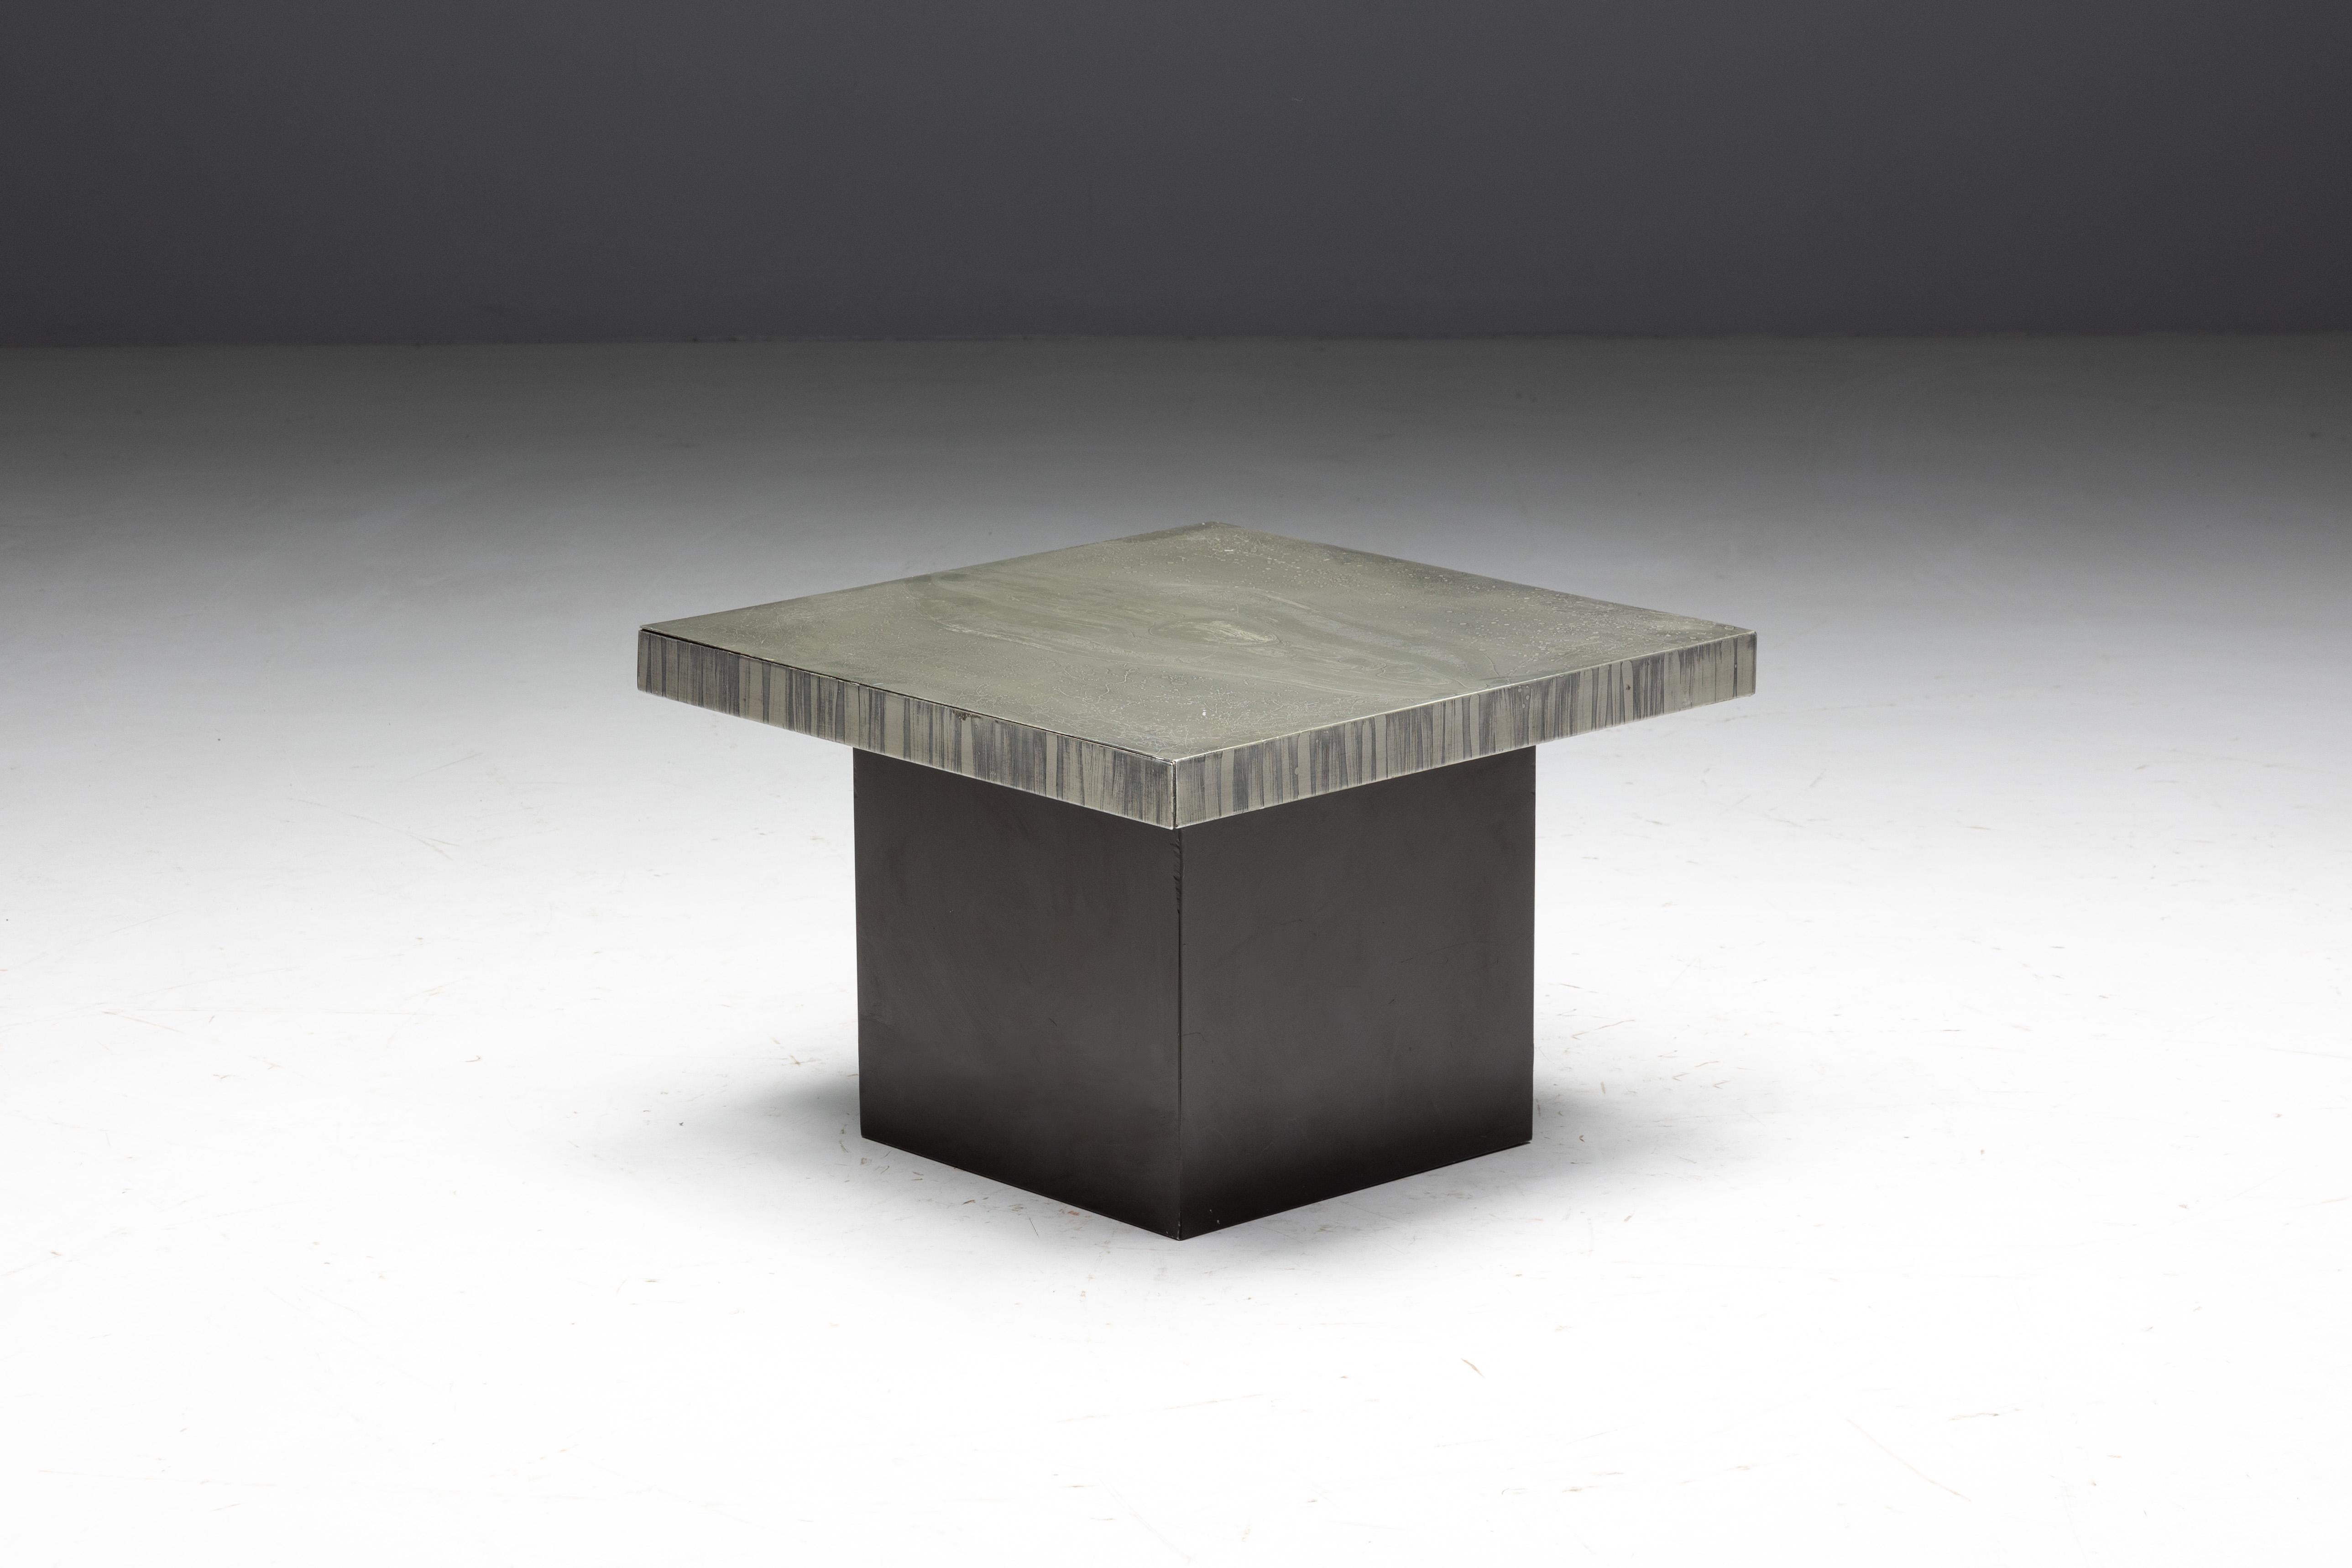 Aluminium Etched Coffee Table by Marc D’haenens, Belgium, 1970s For Sale 2